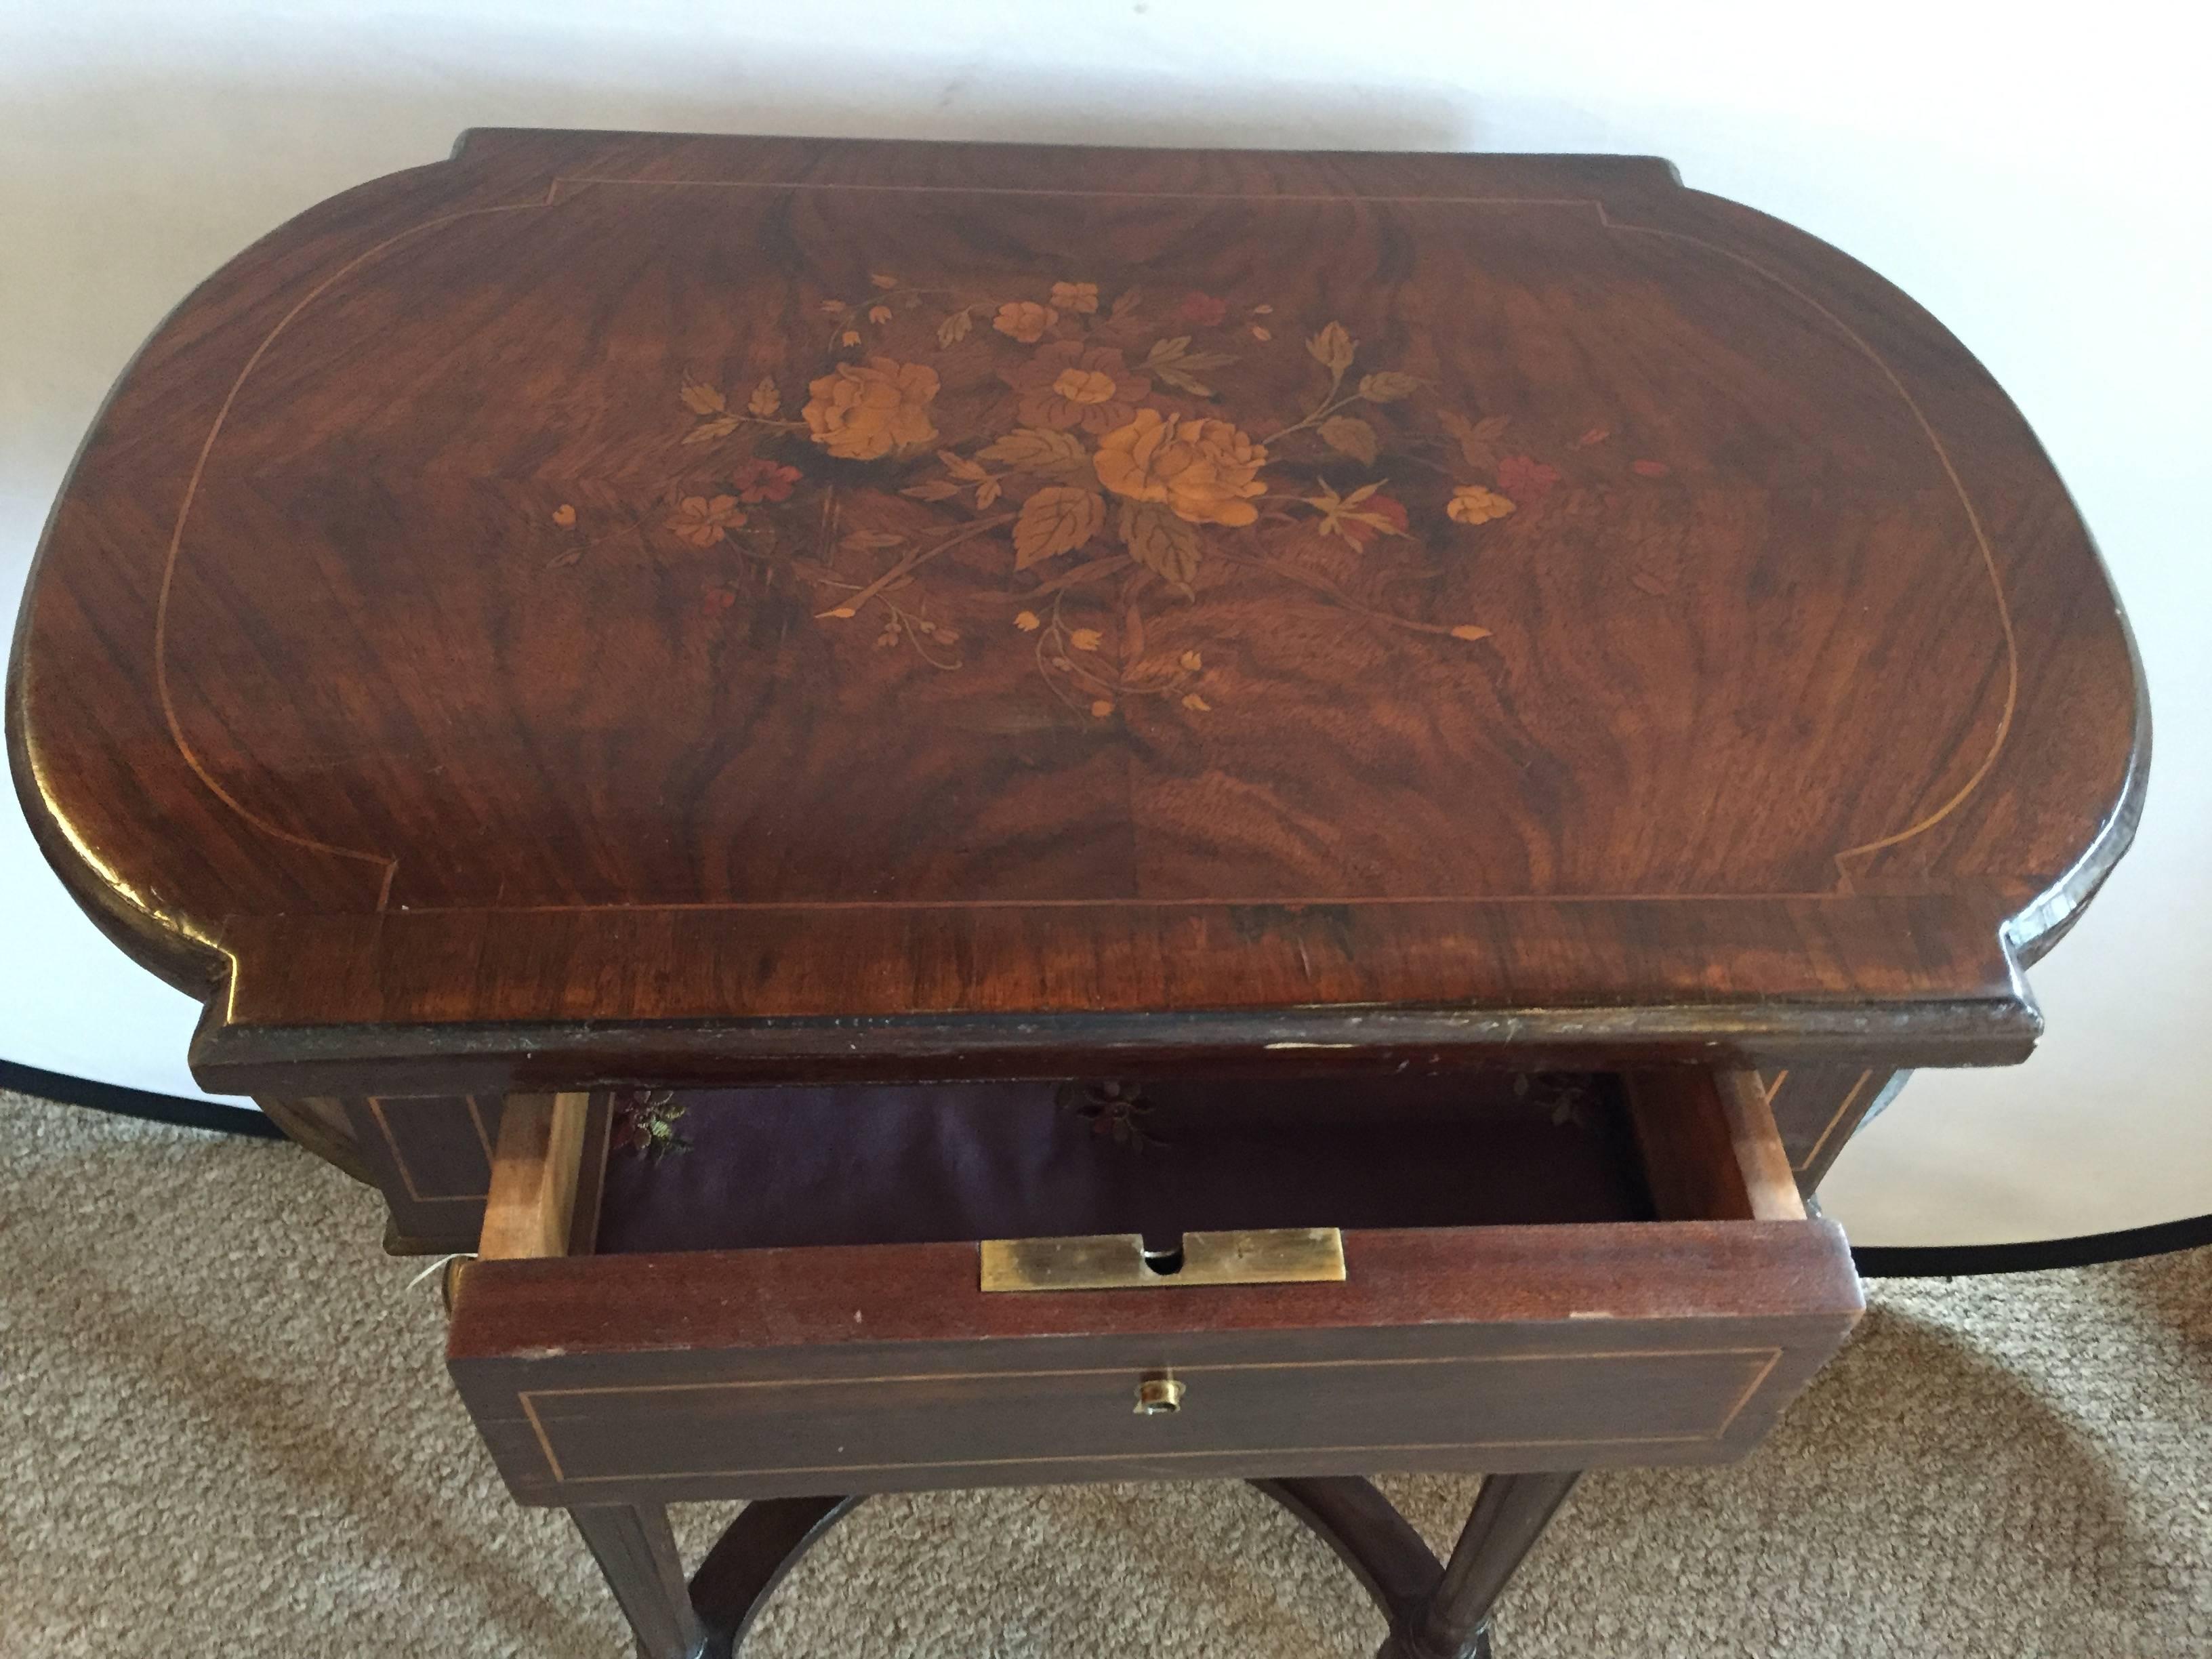 Antique Inlaid Floral Writing Desk or Vanity with Bronze Mounts 1